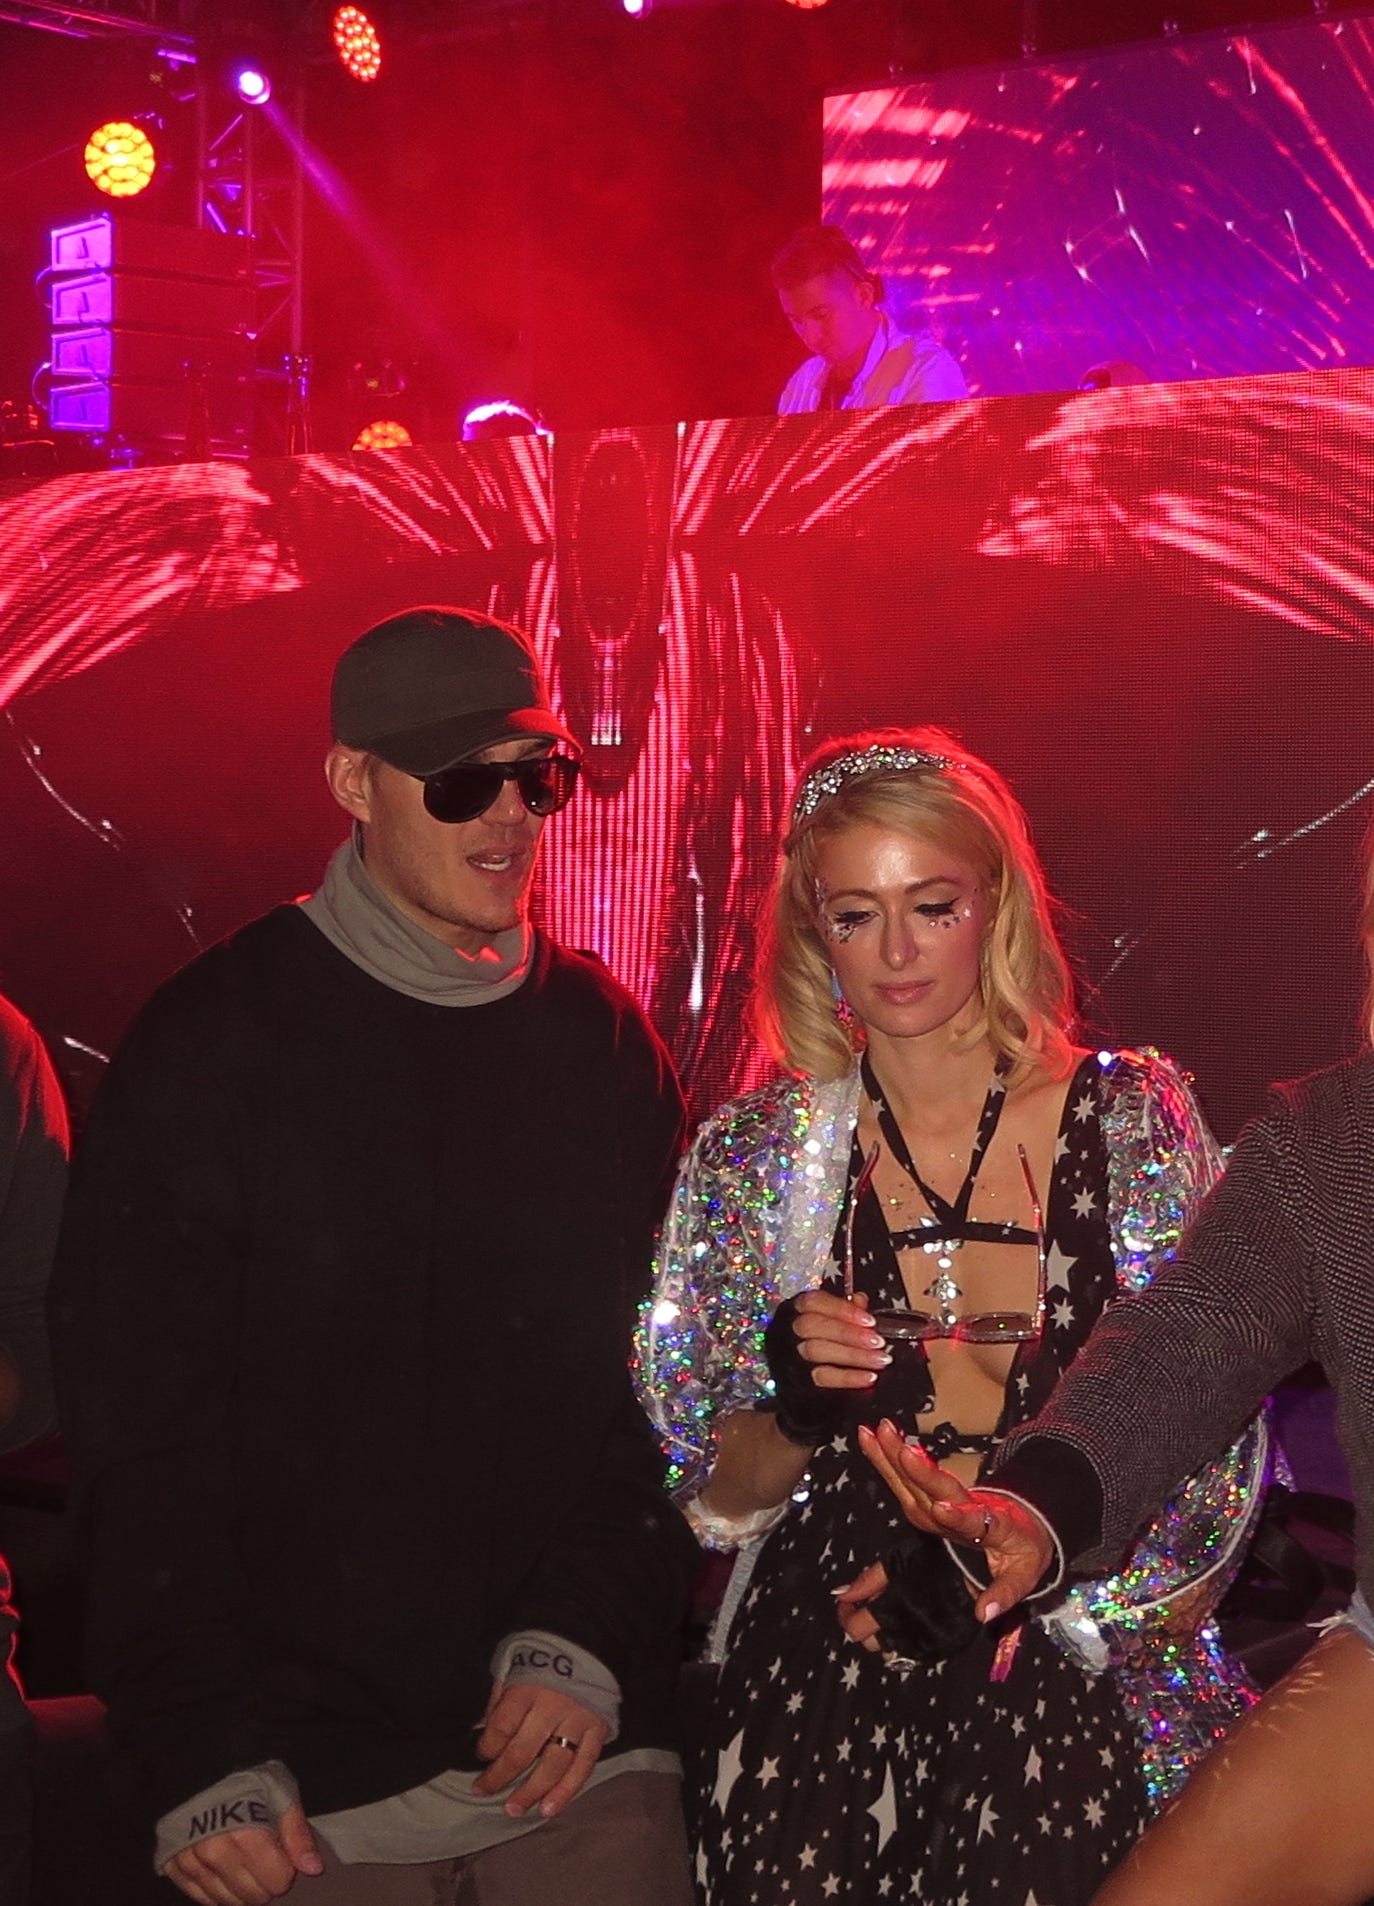 Paris Hilton looked beautiful dancing with her fiancee Chris Zylka to DJ Politik's music behind her on stage.